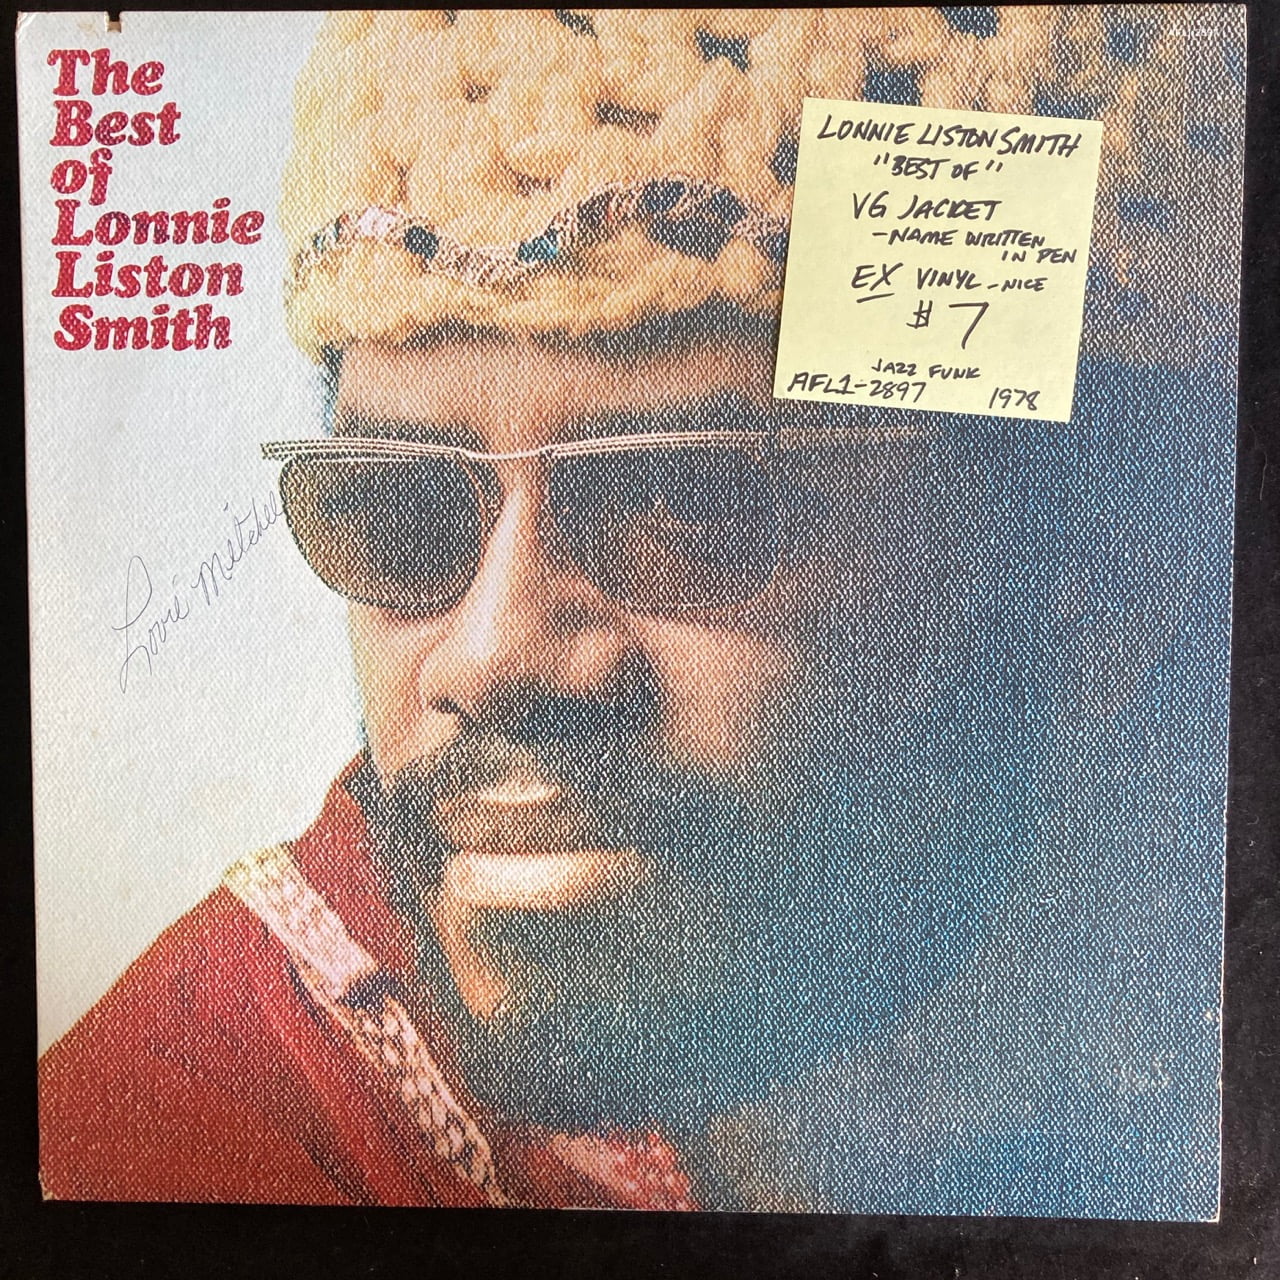 Lonnie Smith Used Vinyl Records For Sale